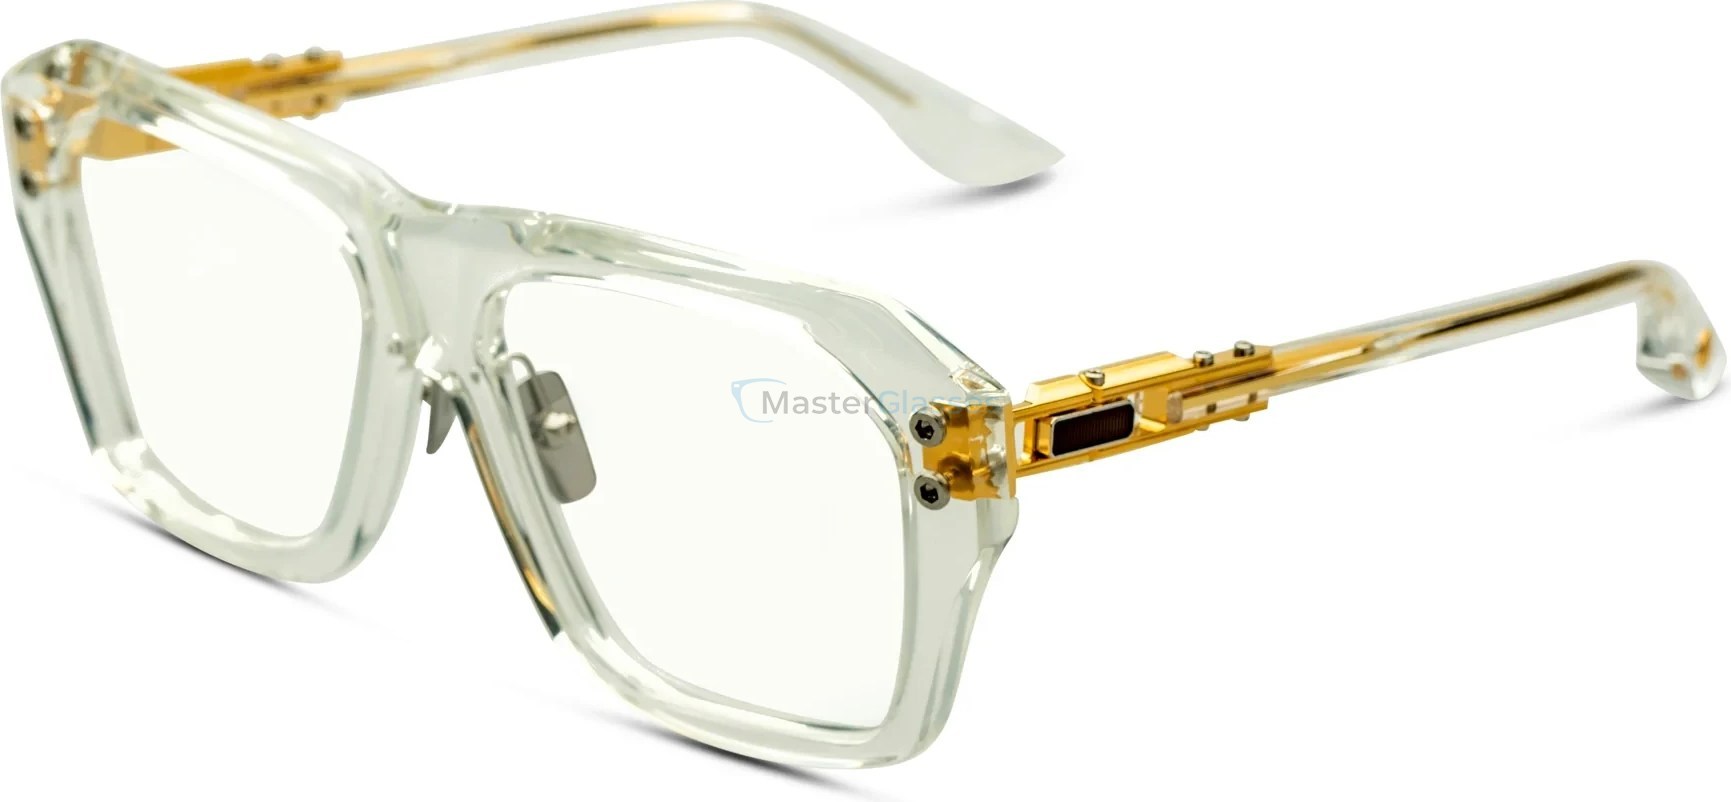  DITA GRAND-APX 02,  CRYSTAL CLEAR - YELLOW GOLD, CLEAR